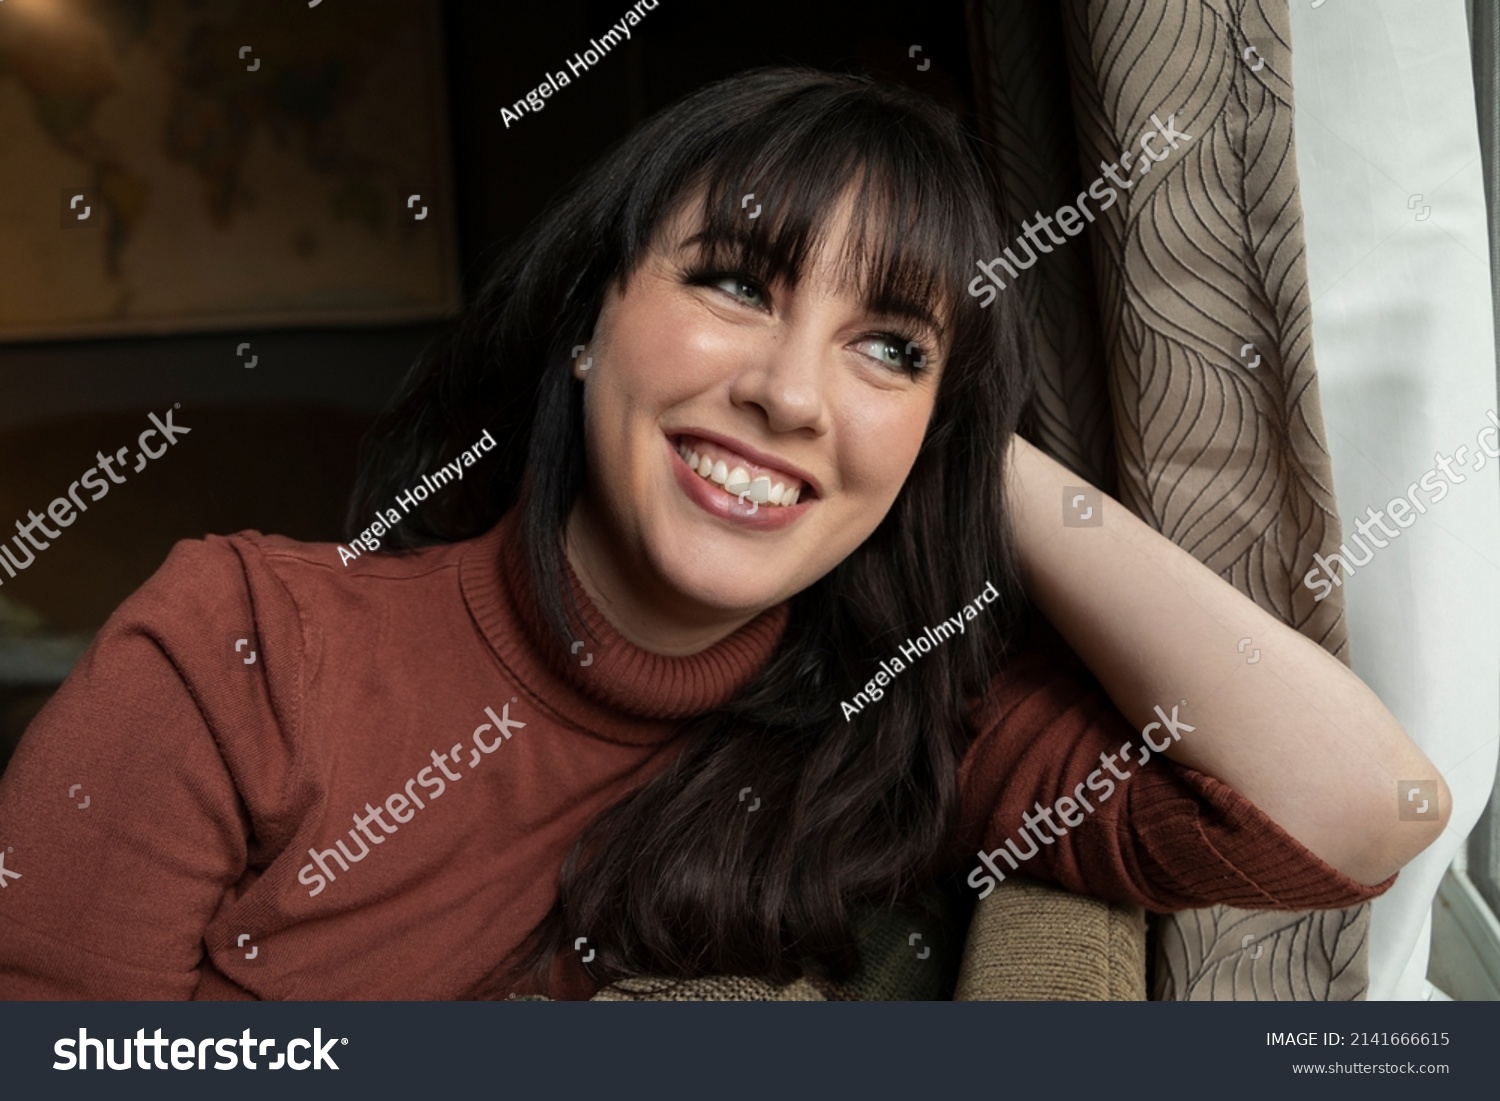 Portrait of a caucasian woman in her 30s smiling while sitting on the couch near a window.  #2141666615